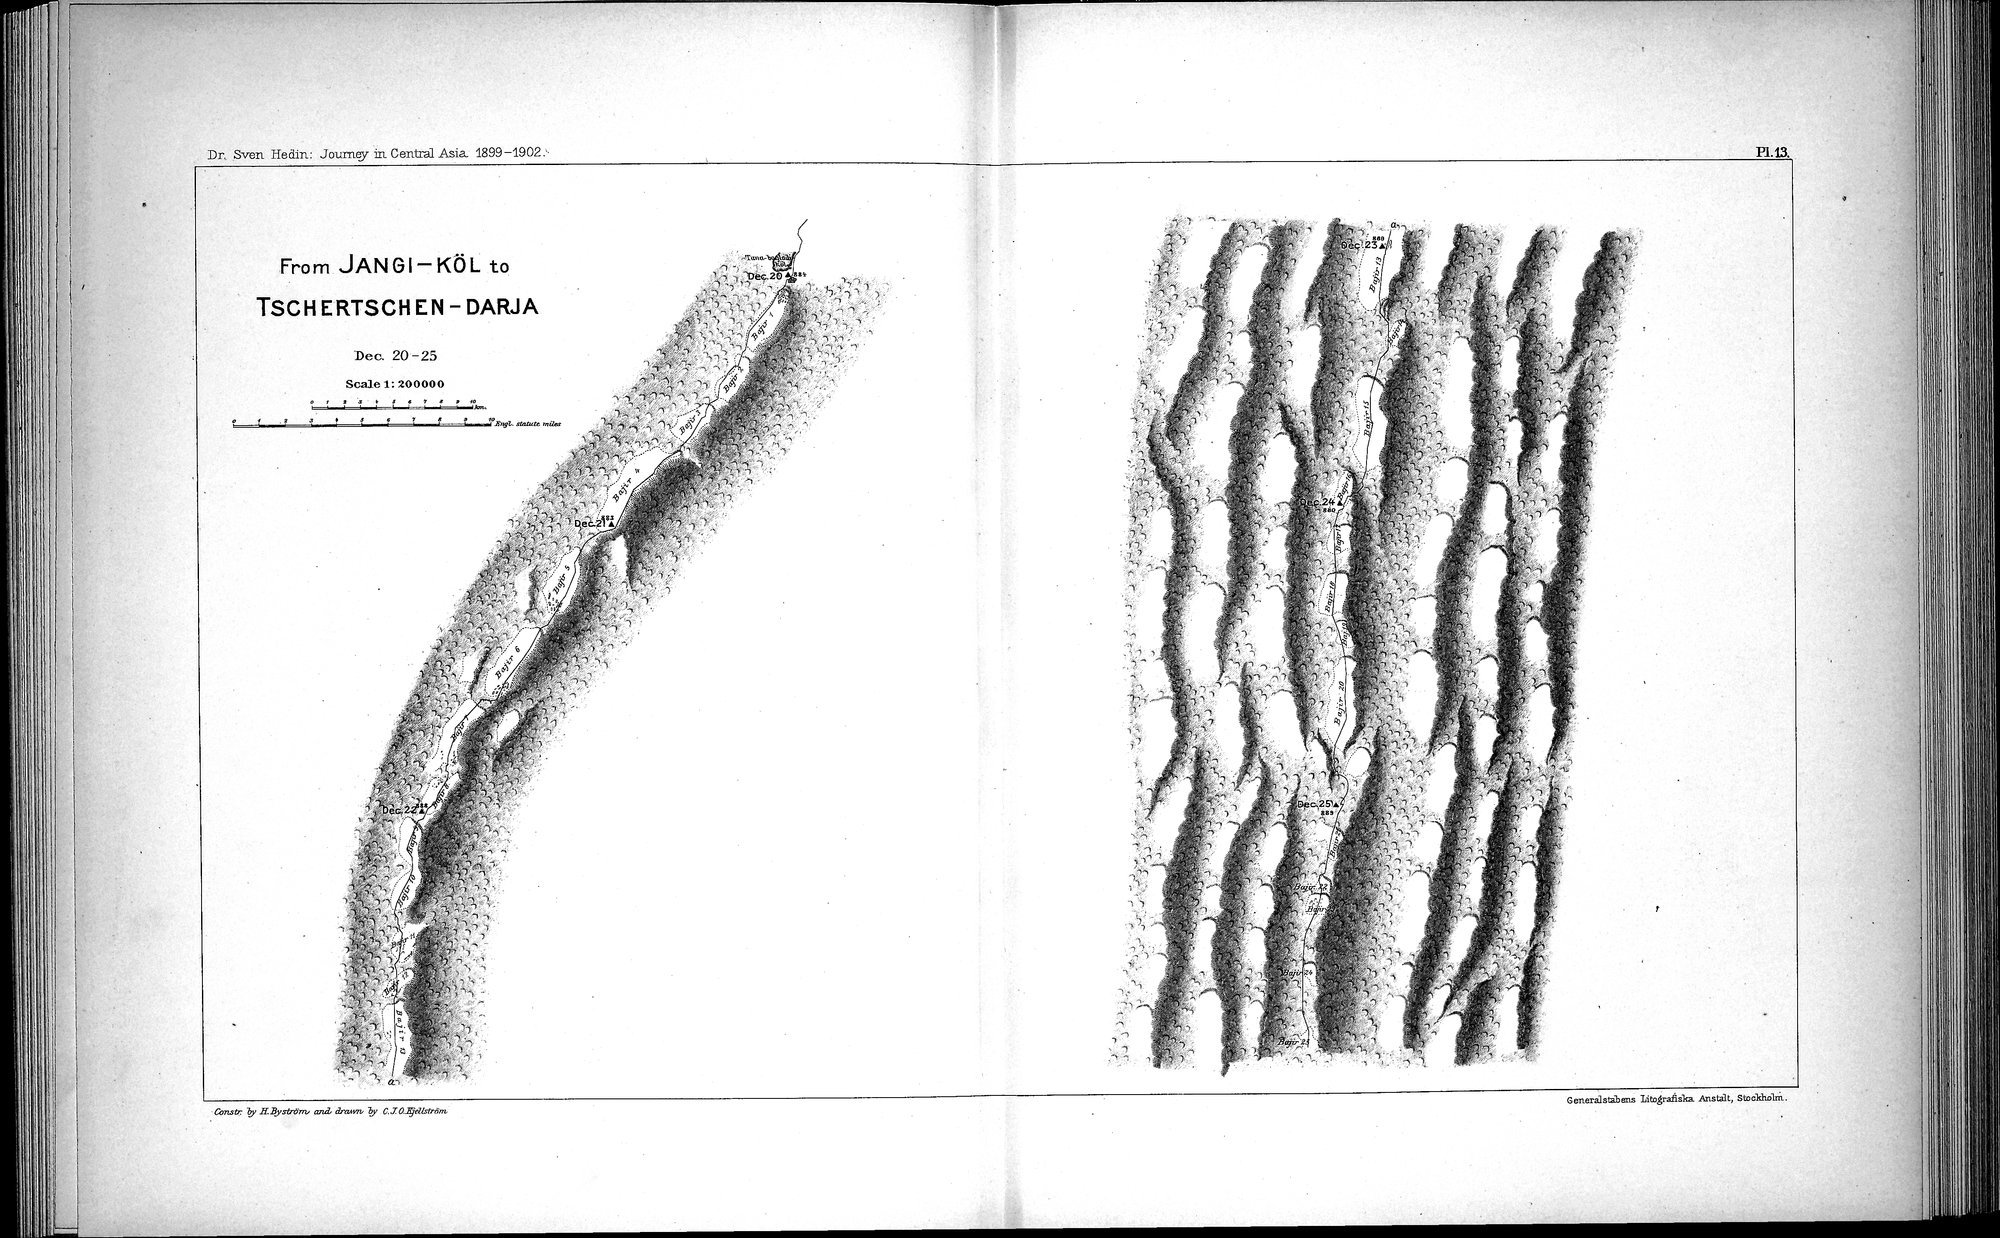 Scientific Results of a Journey in Central Asia, 1899-1902 : vol.7 / 66 ページ（白黒高解像度画像）